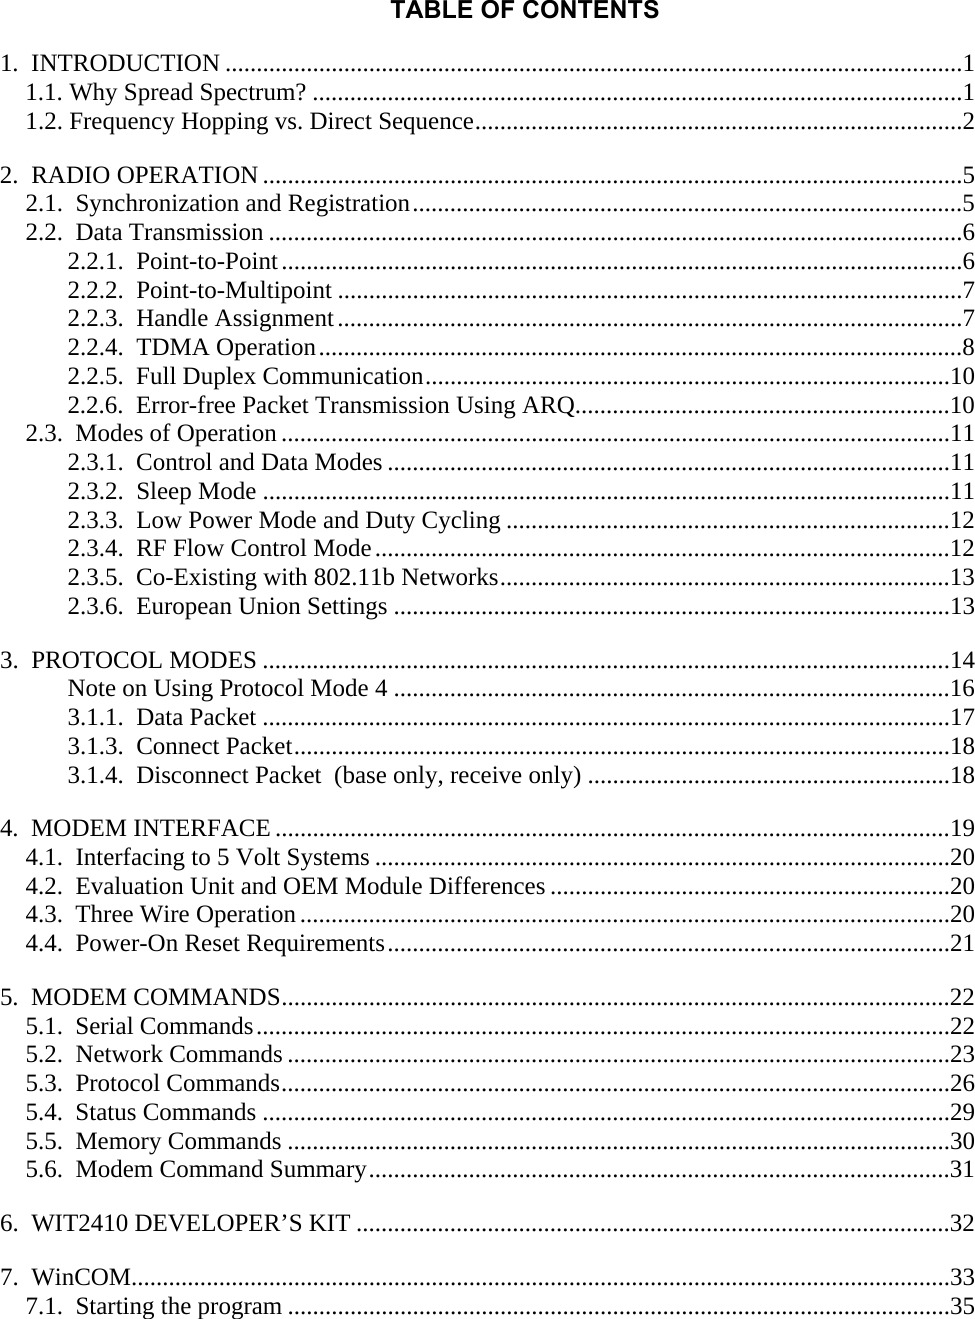 TABLE OF CONTENTS 1.  INTRODUCTION ......................................................................................................................1 1.1. Why Spread Spectrum? ........................................................................................................1 1.2. Frequency Hopping vs. Direct Sequence..............................................................................2 2.  RADIO OPERATION ................................................................................................................5 2.1.  Synchronization and Registration........................................................................................5 2.2.  Data Transmission ...............................................................................................................6 2.2.1.  Point-to-Point.............................................................................................................6 2.2.2.  Point-to-Multipoint ....................................................................................................7 2.2.3.  Handle Assignment....................................................................................................7 2.2.4.  TDMA Operation.......................................................................................................8 2.2.5.  Full Duplex Communication....................................................................................10 2.2.6.  Error-free Packet Transmission Using ARQ............................................................10 2.3.  Modes of Operation ...........................................................................................................11 2.3.1.  Control and Data Modes ..........................................................................................11 2.3.2.  Sleep Mode ..............................................................................................................11 2.3.3.  Low Power Mode and Duty Cycling .......................................................................12 2.3.4.  RF Flow Control Mode............................................................................................12 2.3.5.  Co-Existing with 802.11b Networks........................................................................13 2.3.6.  European Union Settings .........................................................................................13 3.  PROTOCOL MODES ..............................................................................................................14 Note on Using Protocol Mode 4 .........................................................................................16 3.1.1.  Data Packet ..............................................................................................................17 3.1.3.  Connect Packet.........................................................................................................18 3.1.4.  Disconnect Packet  (base only, receive only) ..........................................................18 4.  MODEM INTERFACE ............................................................................................................19 4.1.  Interfacing to 5 Volt Systems ............................................................................................20 4.2.  Evaluation Unit and OEM Module Differences ................................................................20 4.3.  Three Wire Operation........................................................................................................20 4.4.  Power-On Reset Requirements..........................................................................................21 5.  MODEM COMMANDS...........................................................................................................22 5.1.  Serial Commands...............................................................................................................22 5.2.  Network Commands ..........................................................................................................23 5.3.  Protocol Commands...........................................................................................................26 5.4.  Status Commands ..............................................................................................................29 5.5.  Memory Commands ..........................................................................................................30 5.6.  Modem Command Summary.............................................................................................31 6.  WIT2410 DEVELOPER’S KIT ...............................................................................................32 7.  WinCOM...................................................................................................................................33 7.1.  Starting the program ..........................................................................................................35  